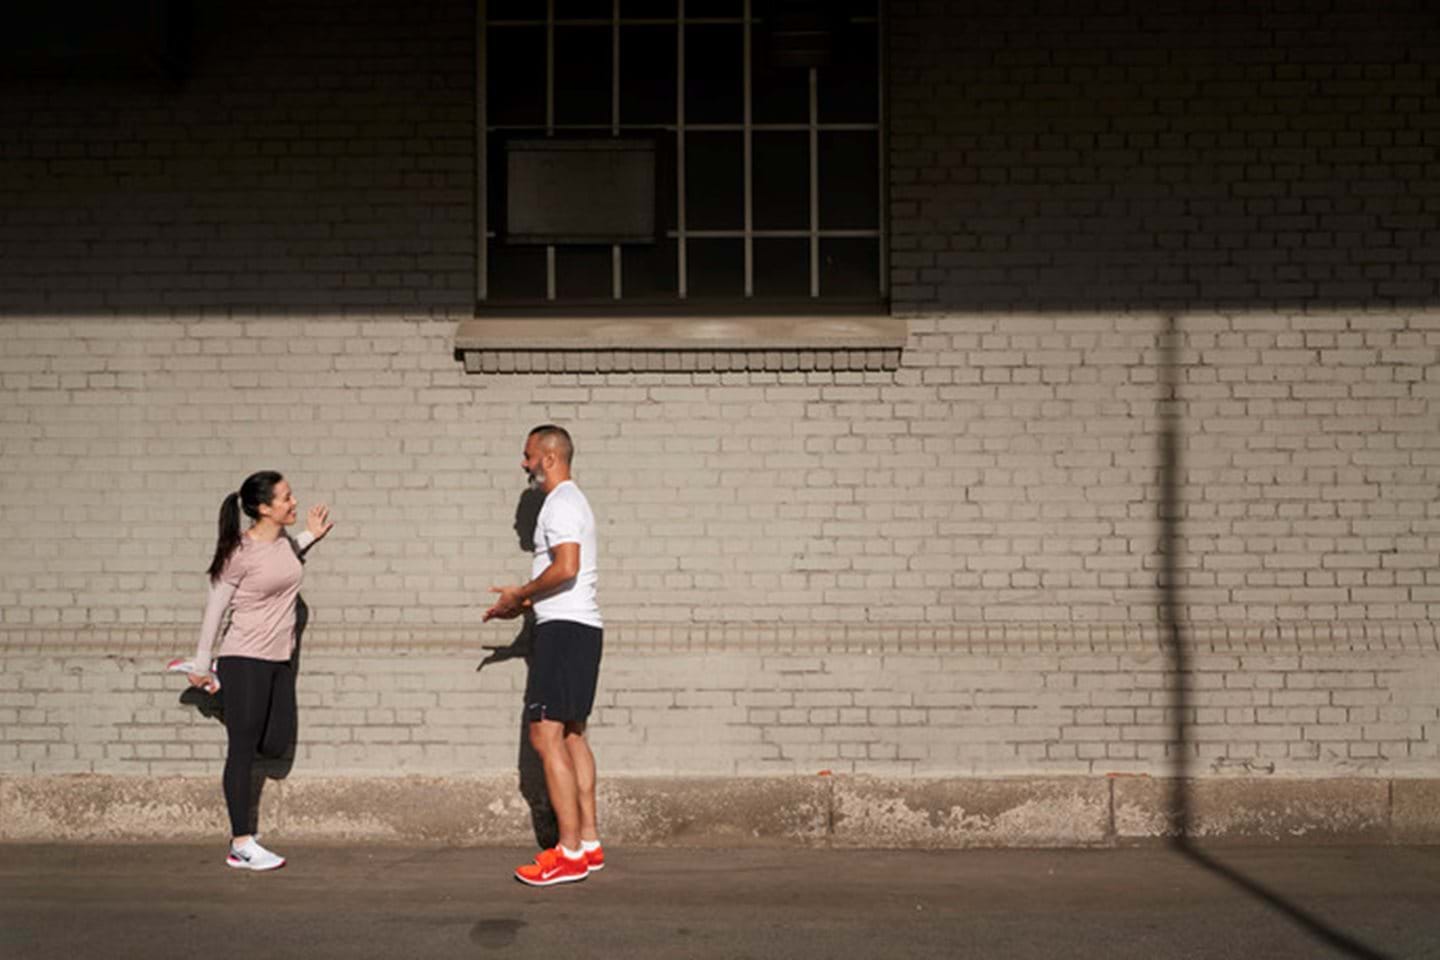 Two colleagues stretch on the sidewalk by a wall before a mid-day jog.